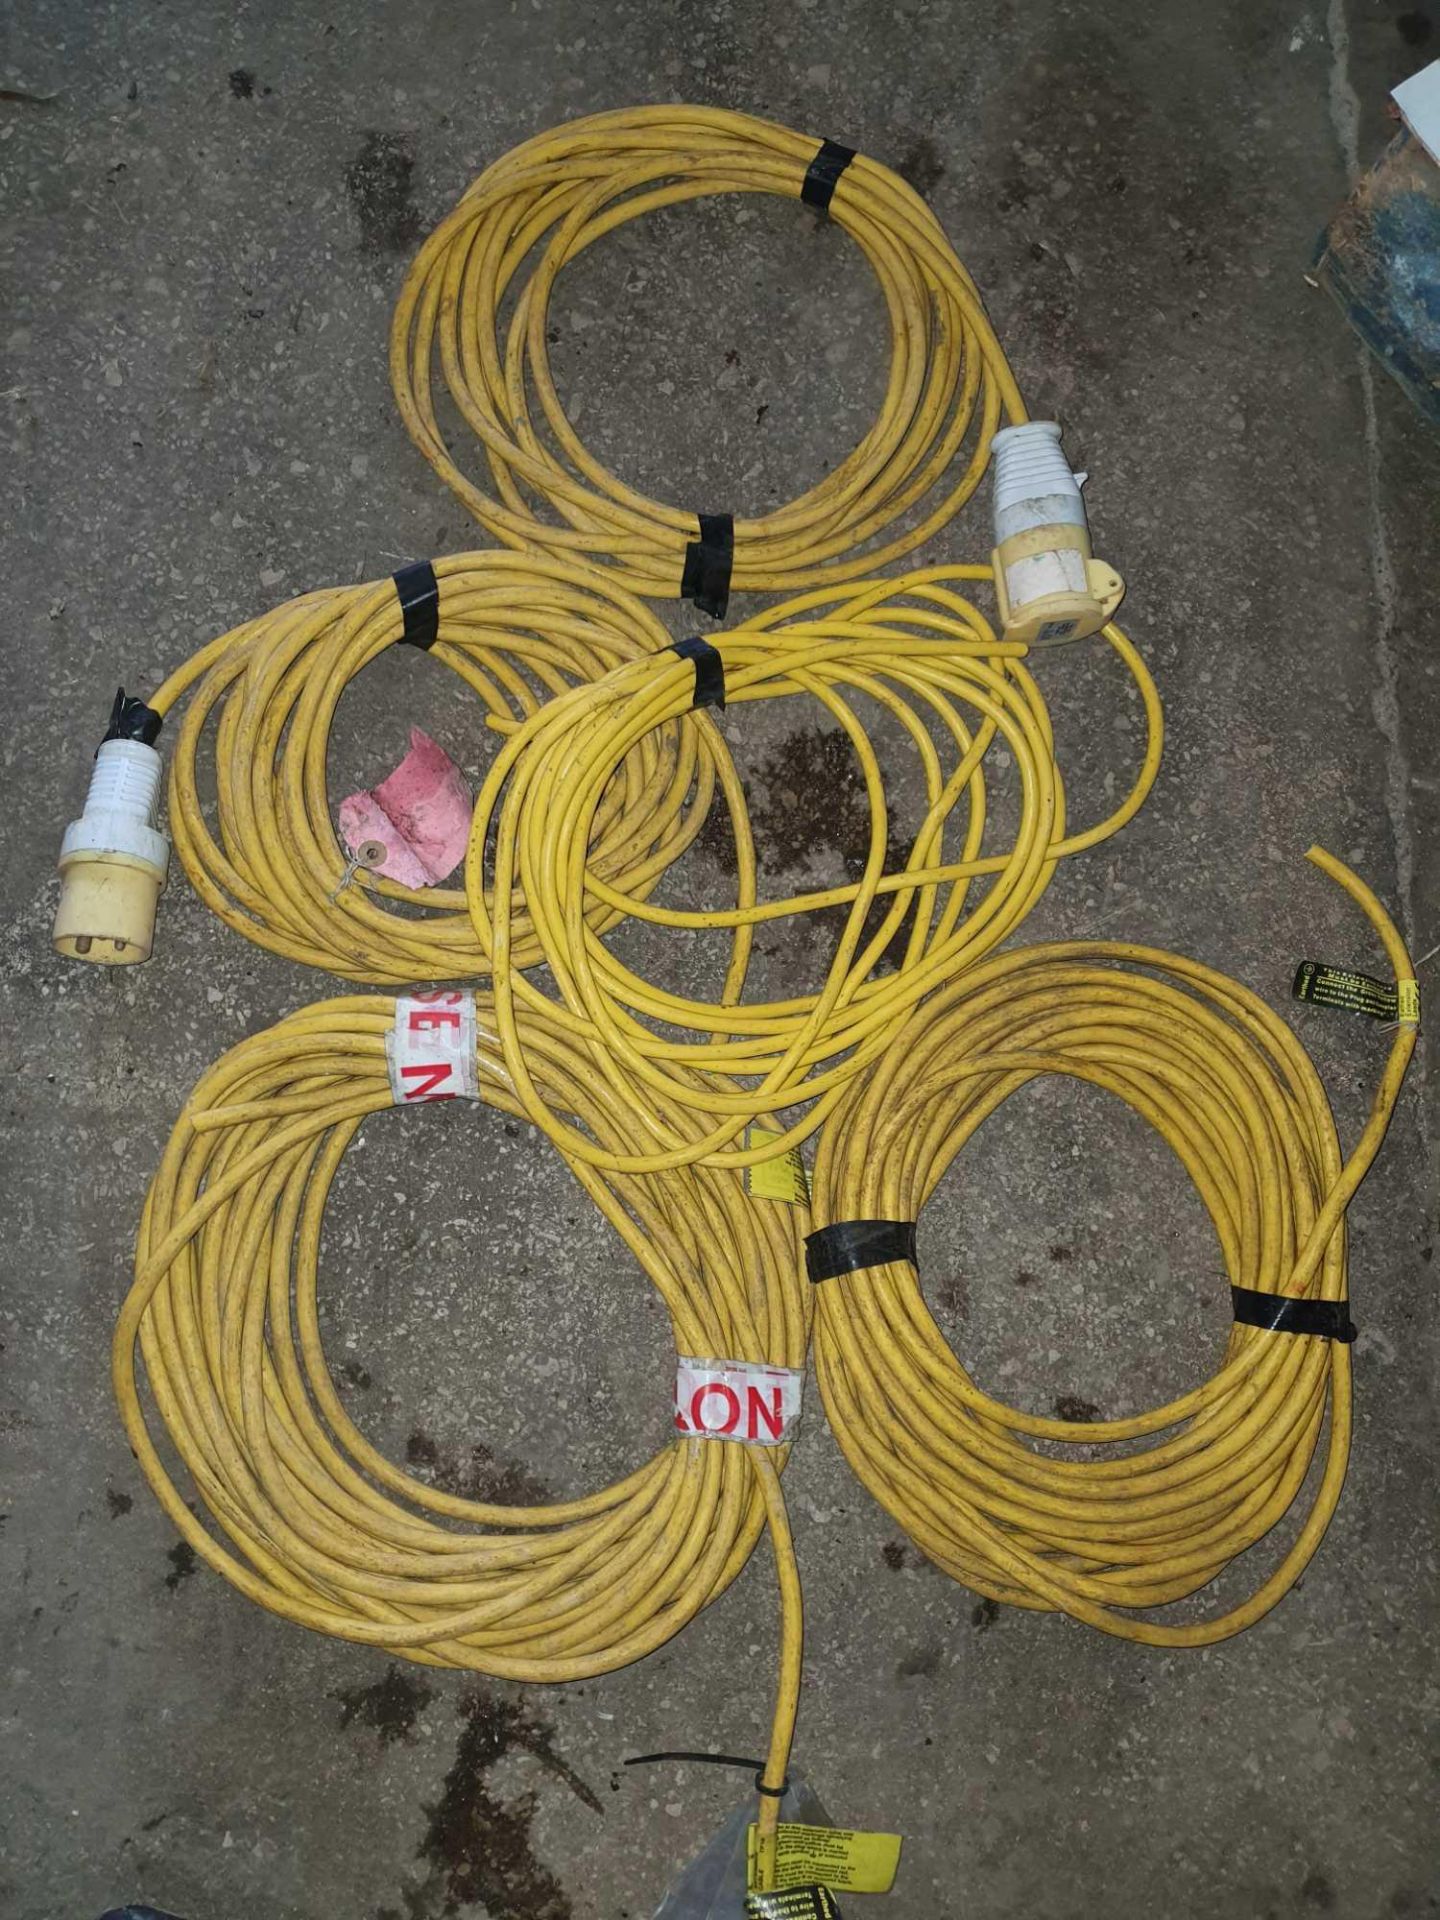 5 x 110v extention lead